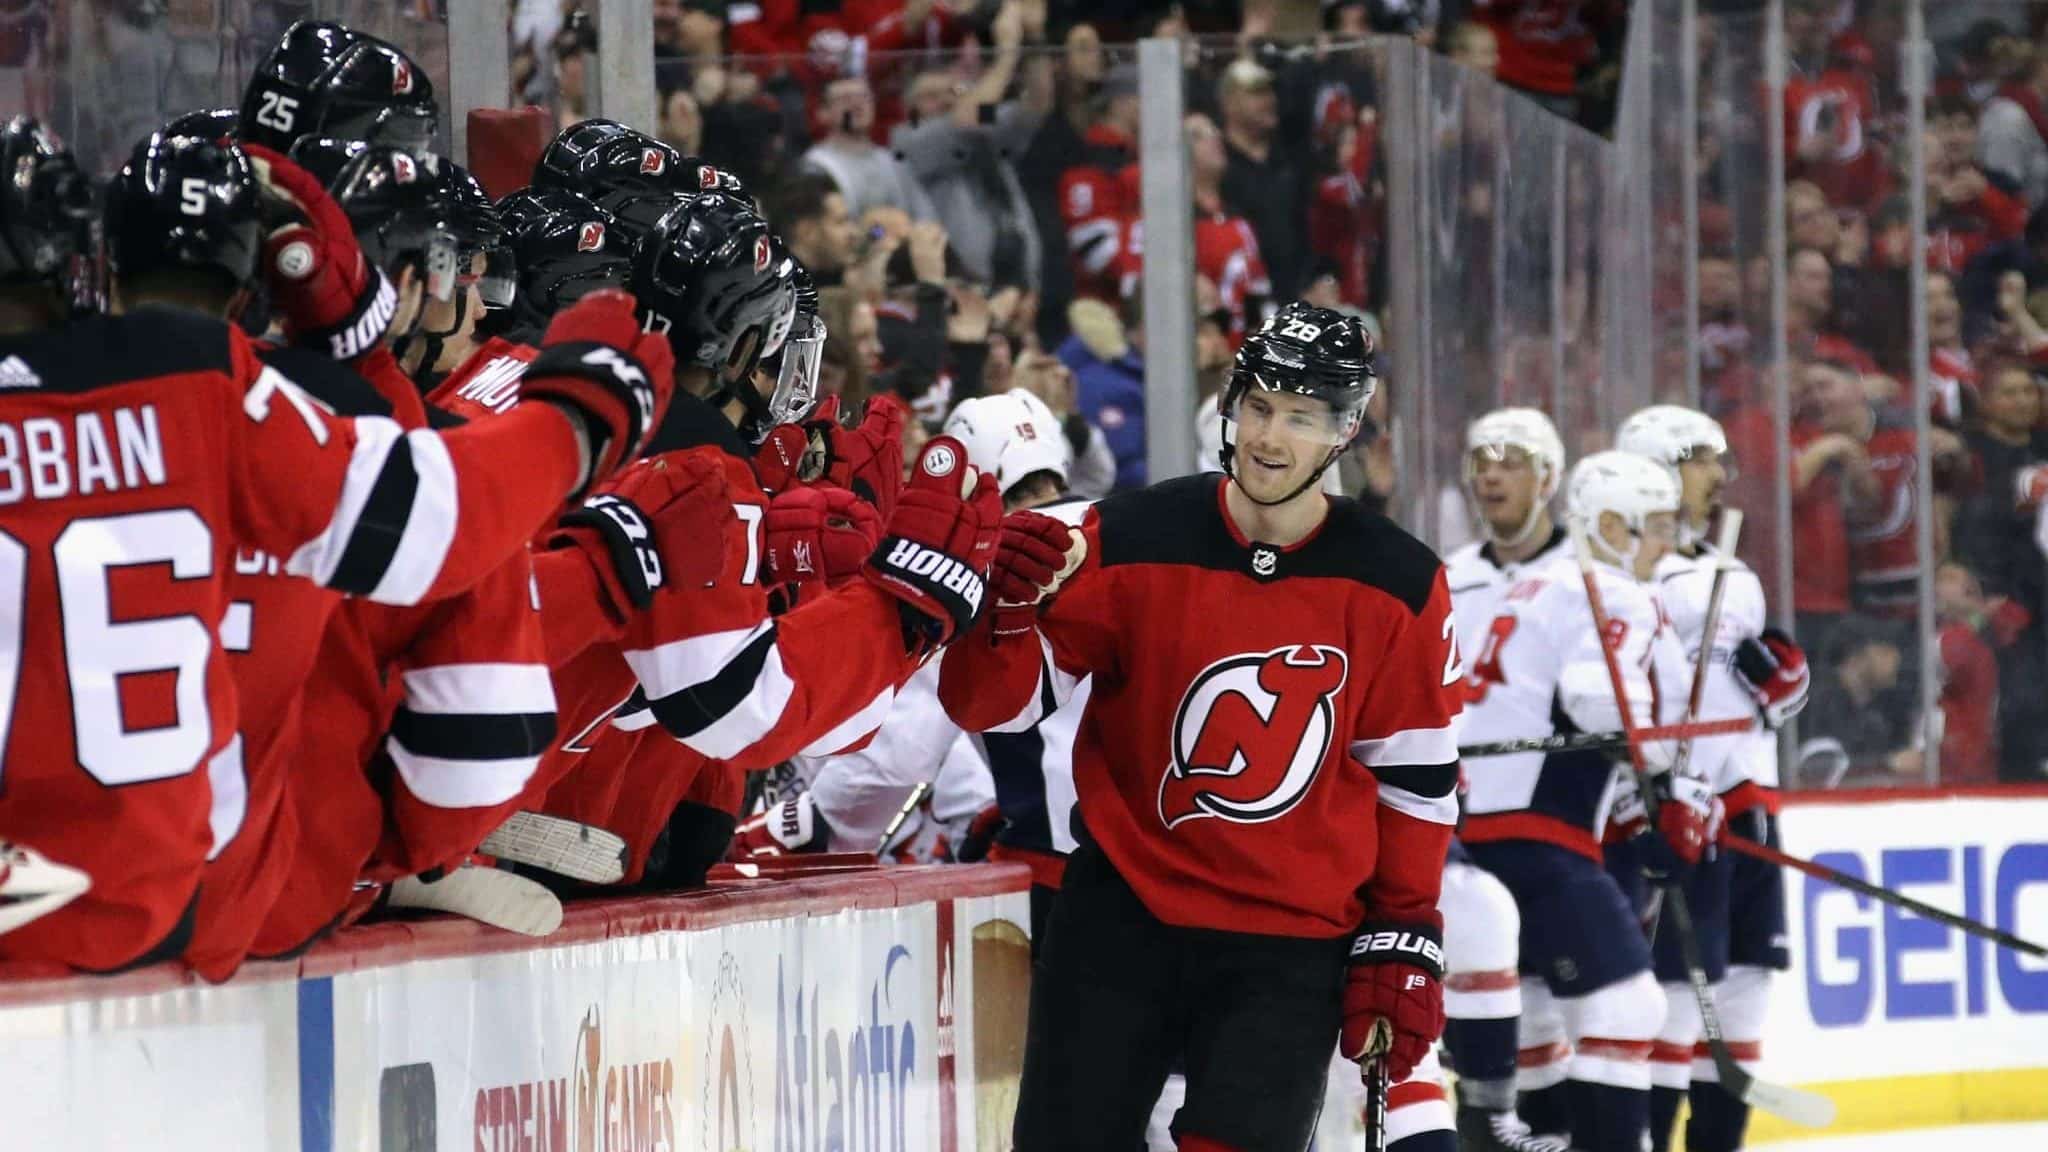 NEWARK, NEW JERSEY - FEBRUARY 22: Damon Severson #28 of the New Jersey Devils celebrates his game winning goal at 18:01 of the third period against the Washington Capitals at the Prudential Center on February 22, 2020 in Newark, New Jersey. The Devils defeated the Capitals 3-2.